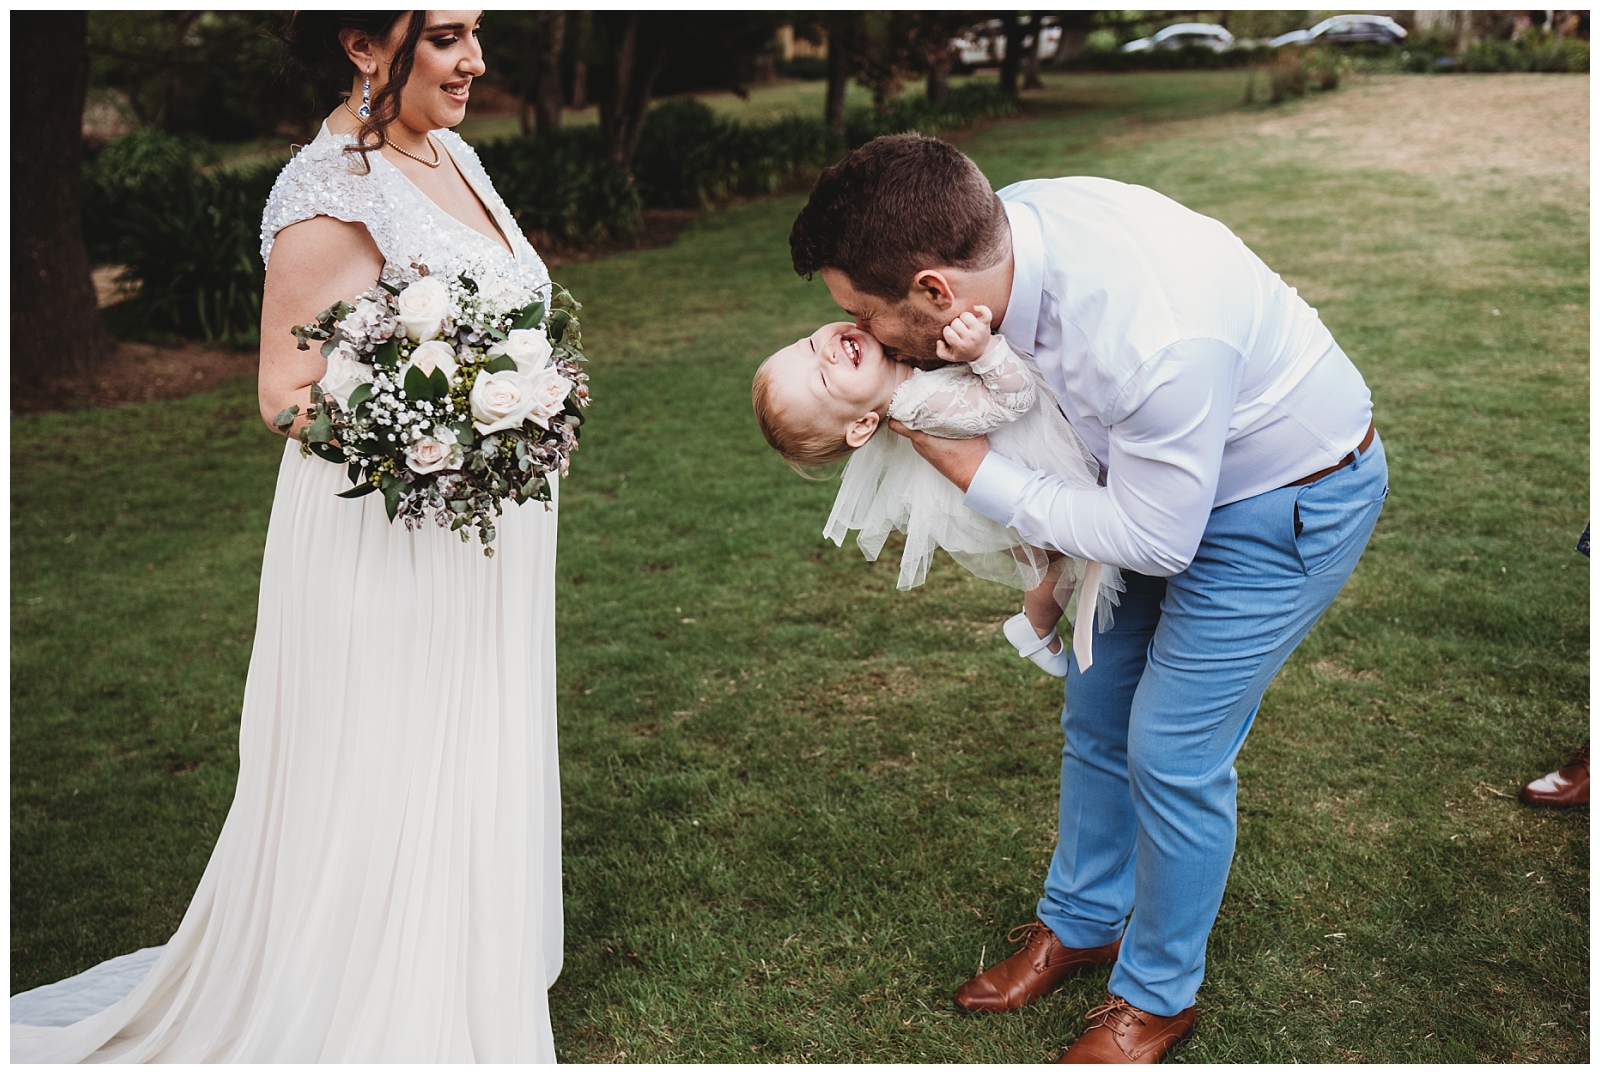 Bride watched as Groom tips their daughter upside down to make her giggle.